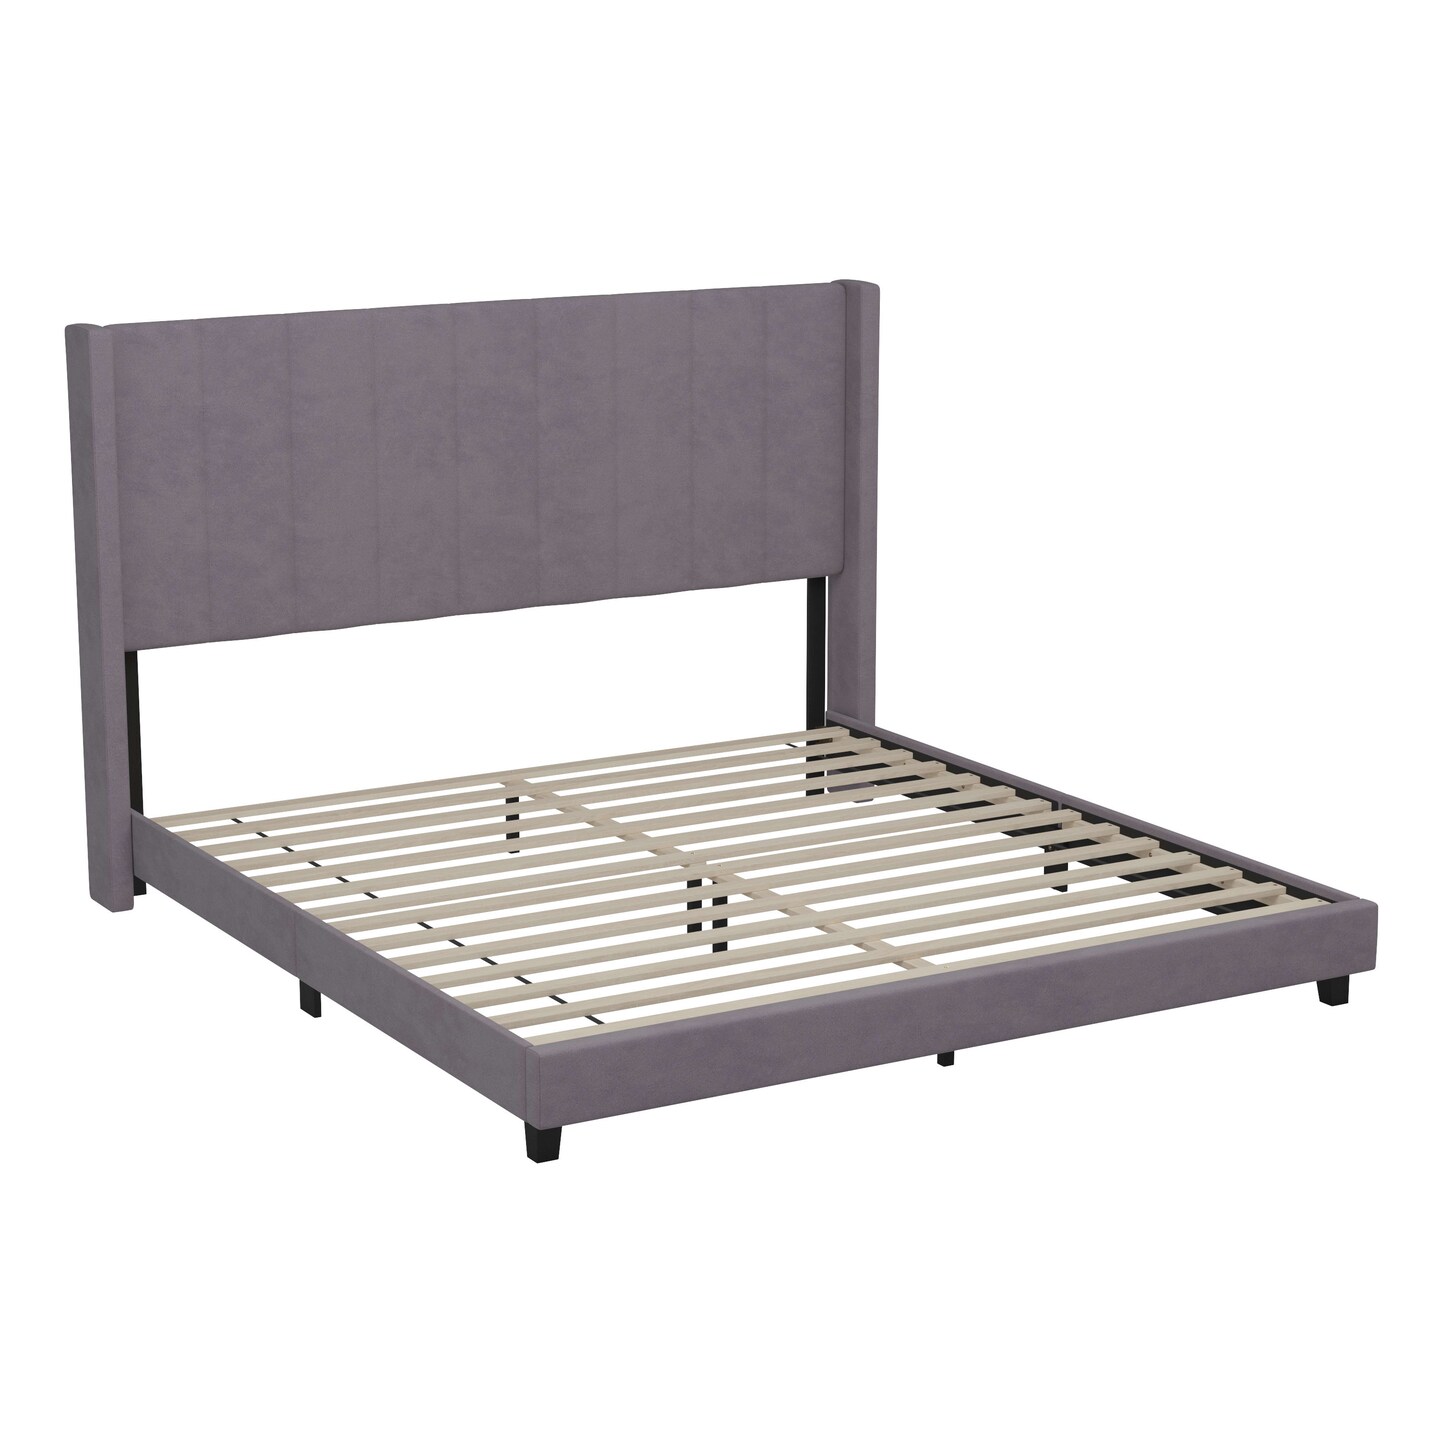 Merrick Lane Sana Modern Upholstered Platform Bed Frame with Padded, Tufted Wingback Headboard and Wood Support Slats, No Box Spring Required